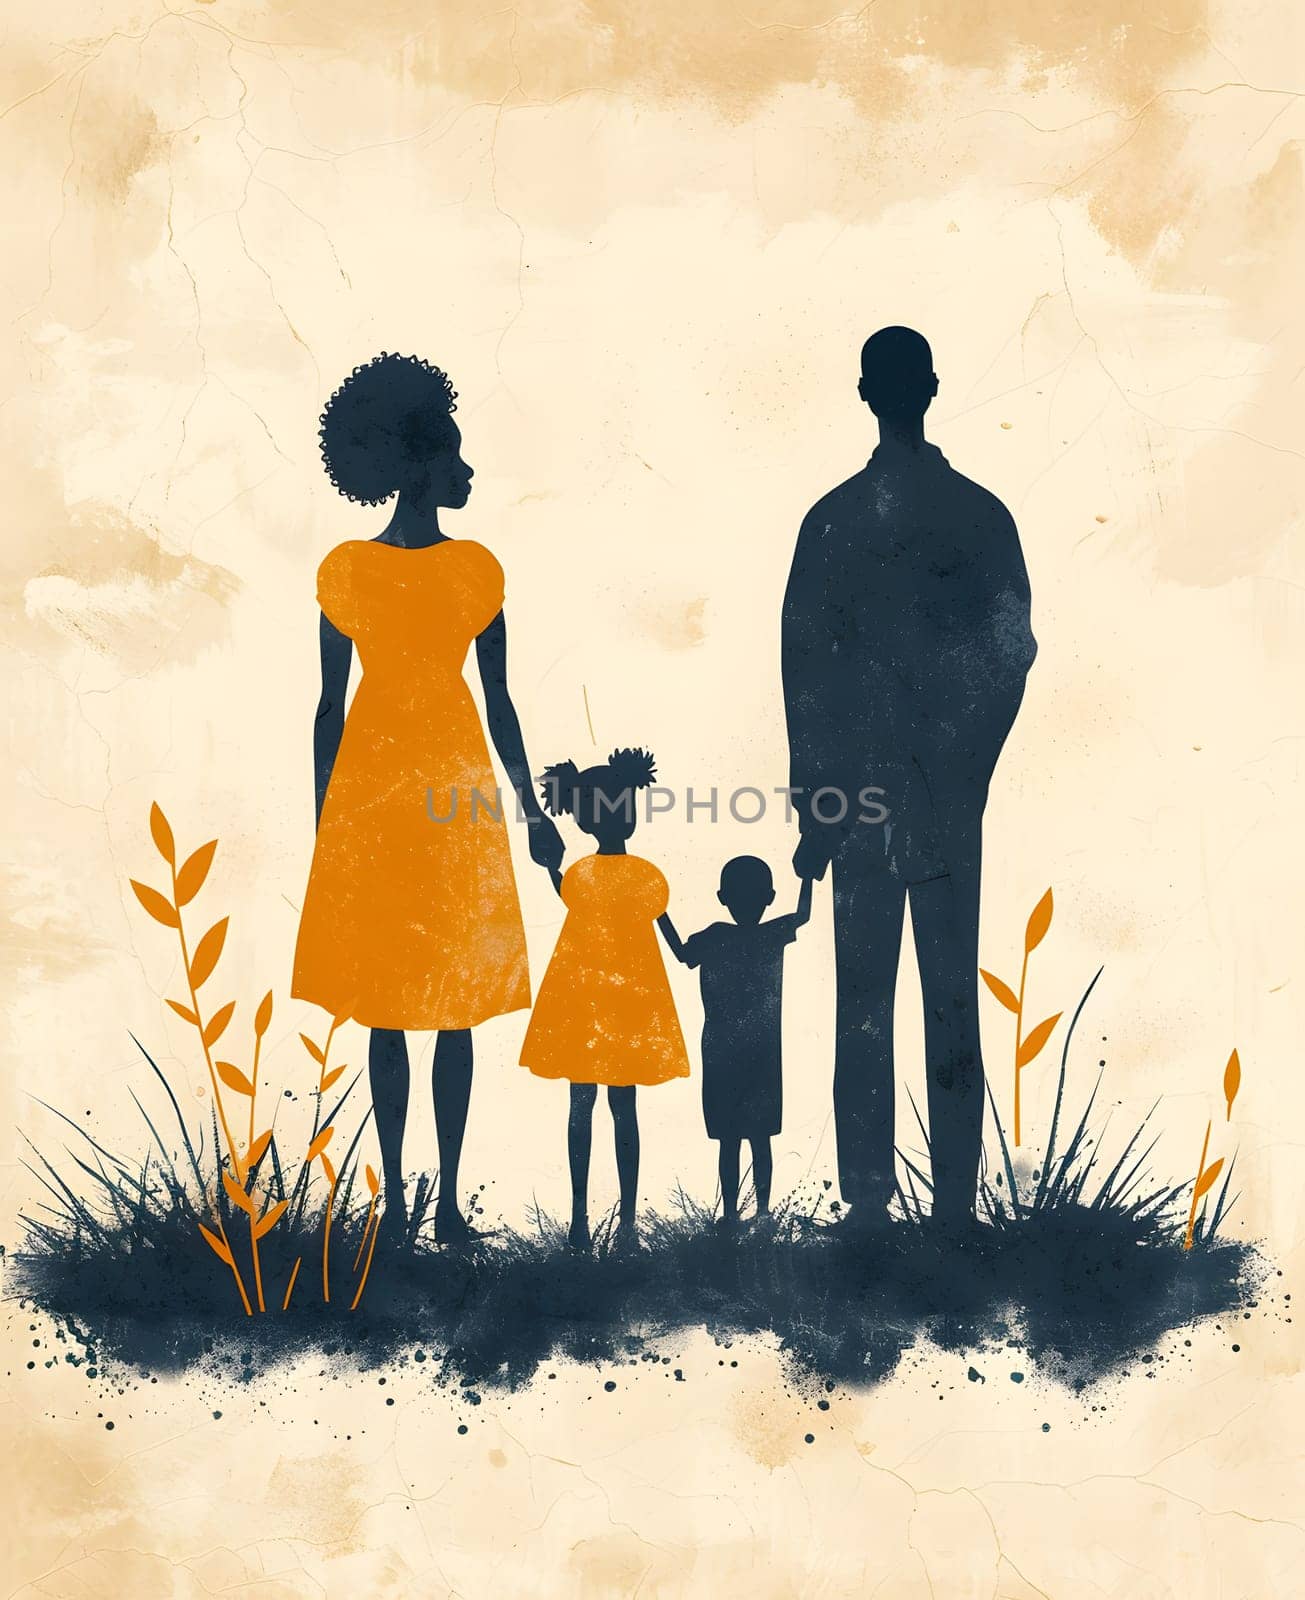 Artistic depiction of a happy family standing in nature holding hands by Nadtochiy